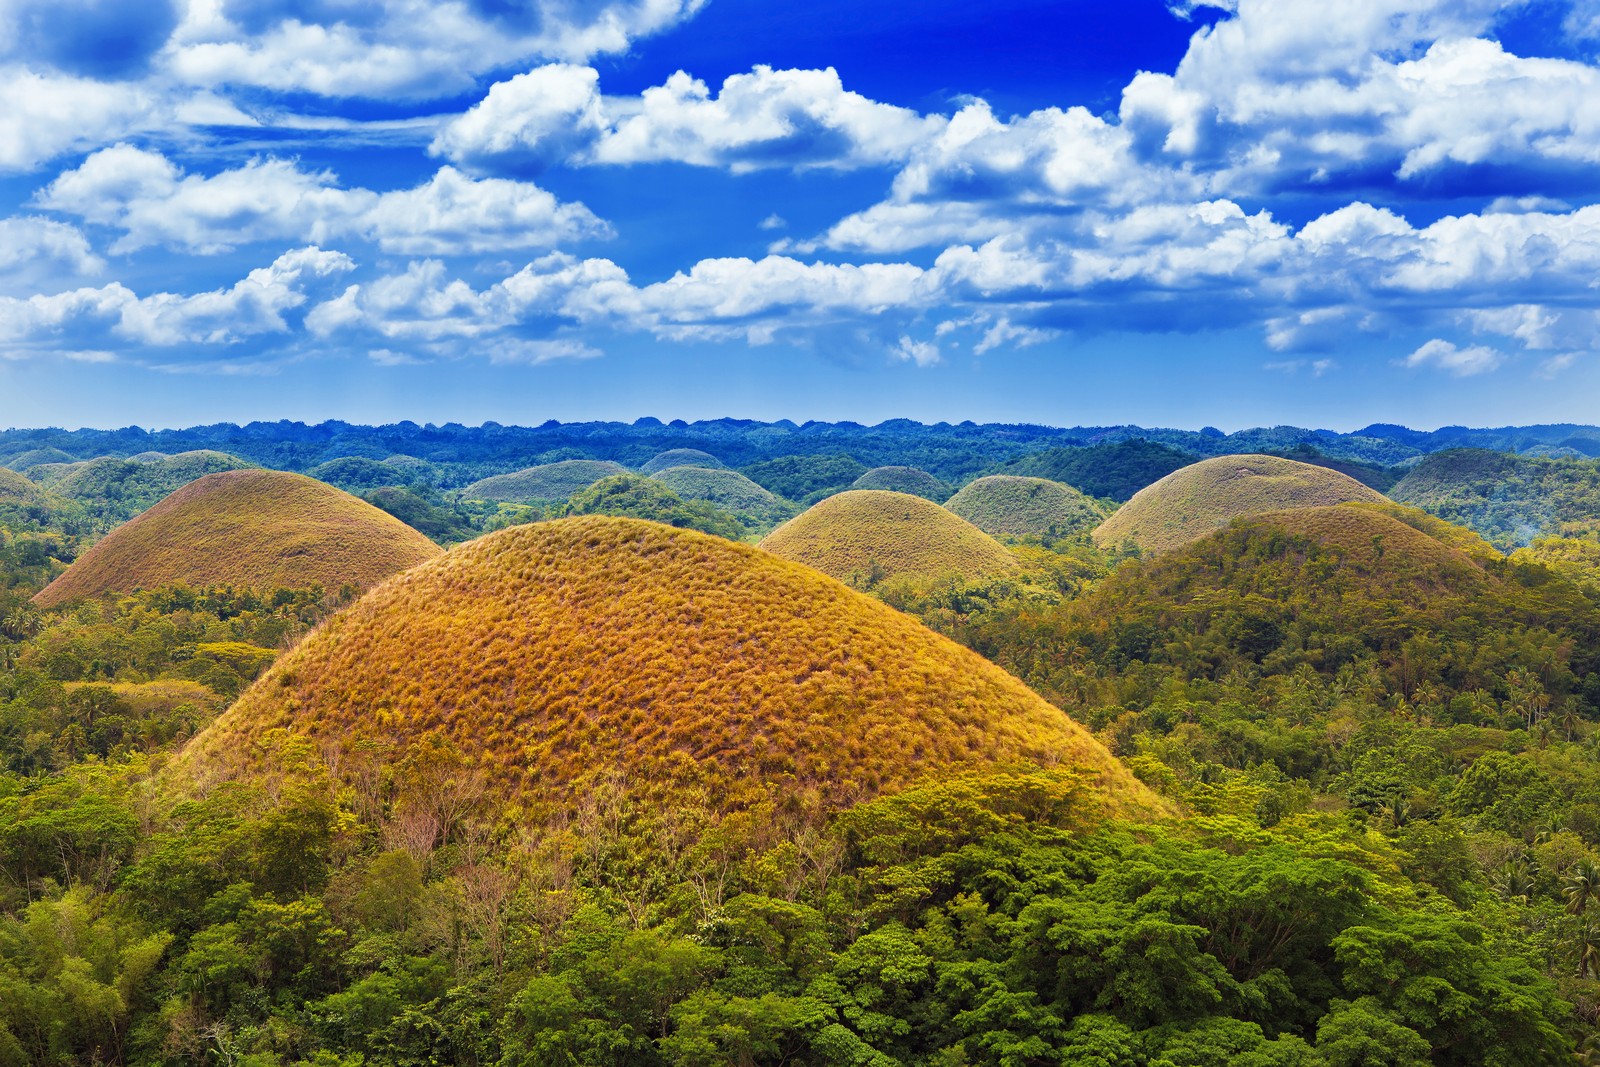 The 5 Facts About Bohol S Chocolate Hills That You Mi - vrogue.co